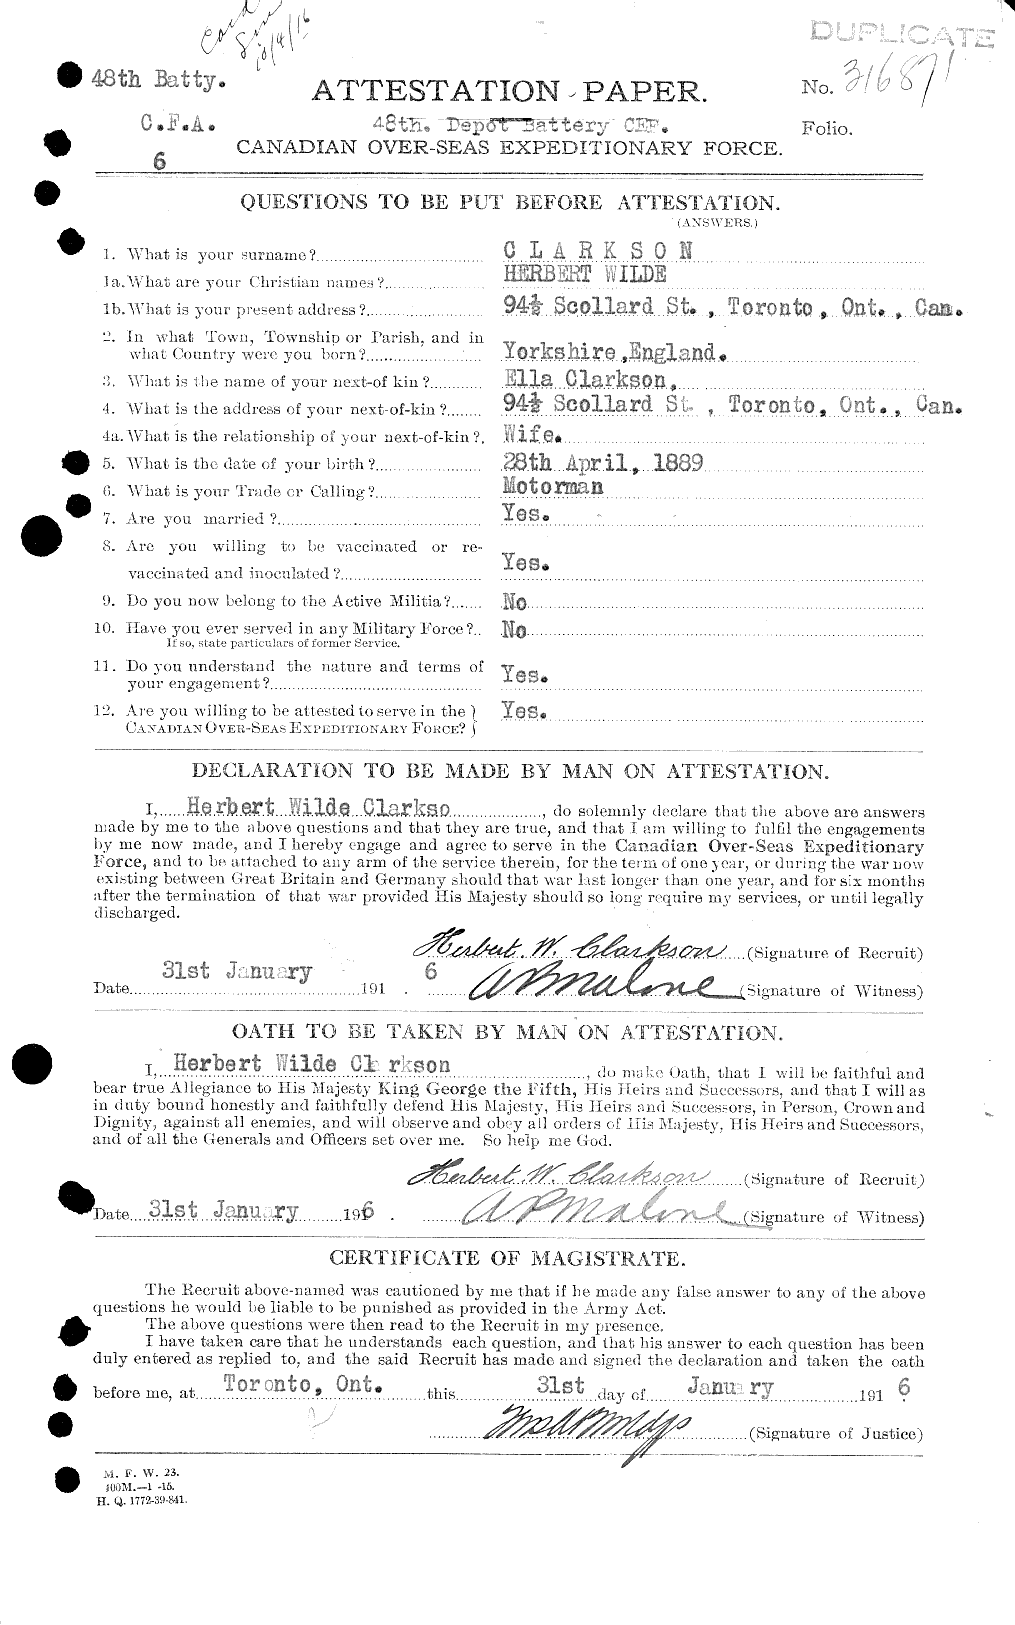 Personnel Records of the First World War - CEF 021440a